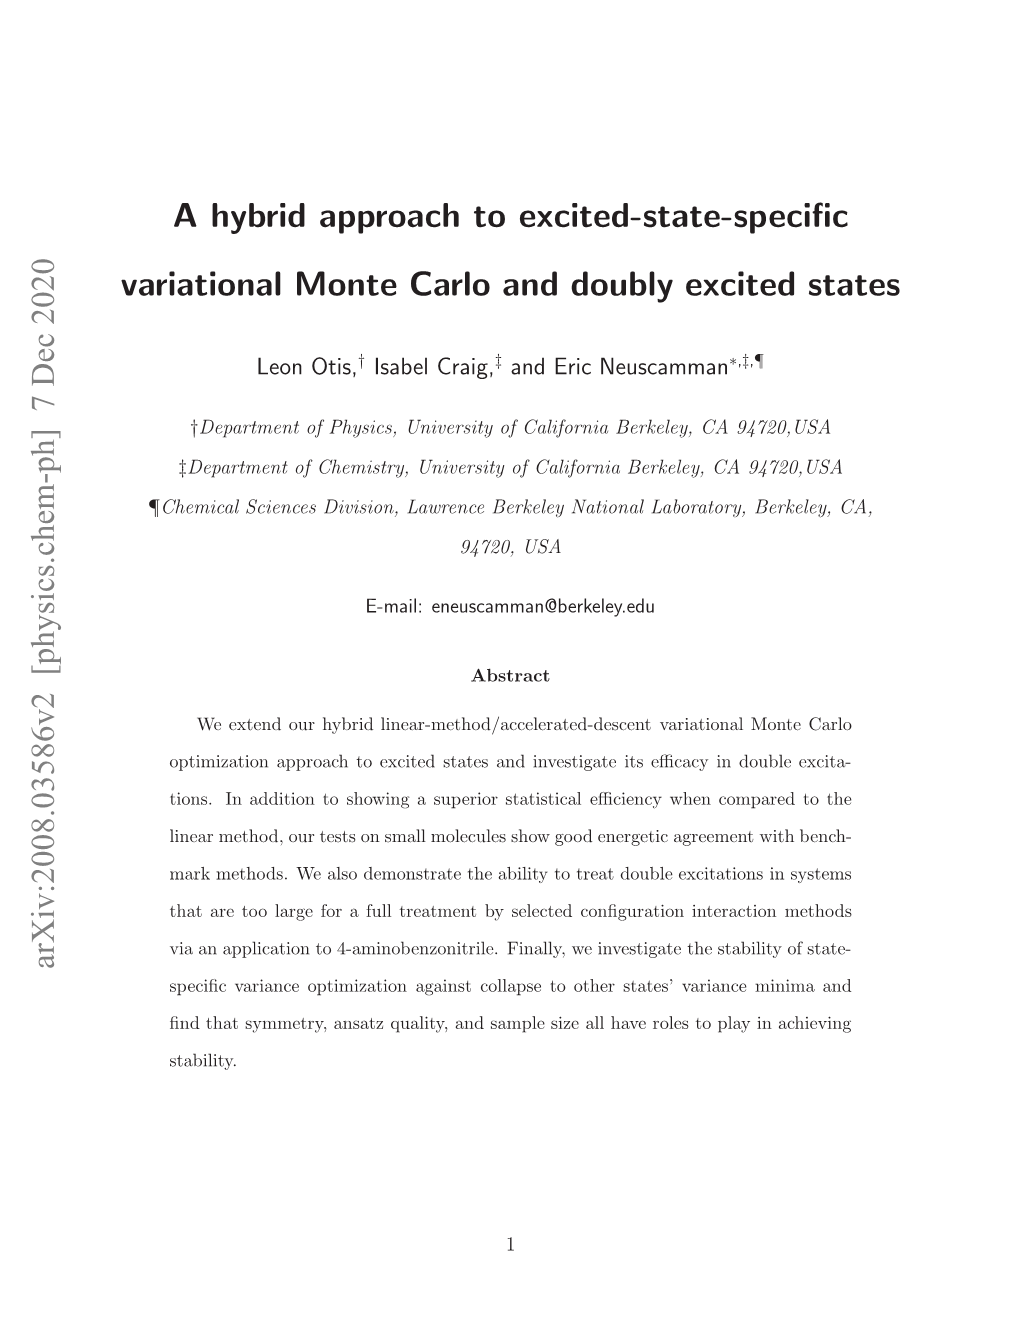 7 Dec 2020 a Hybrid Approach to Excited-State-Specific Variational